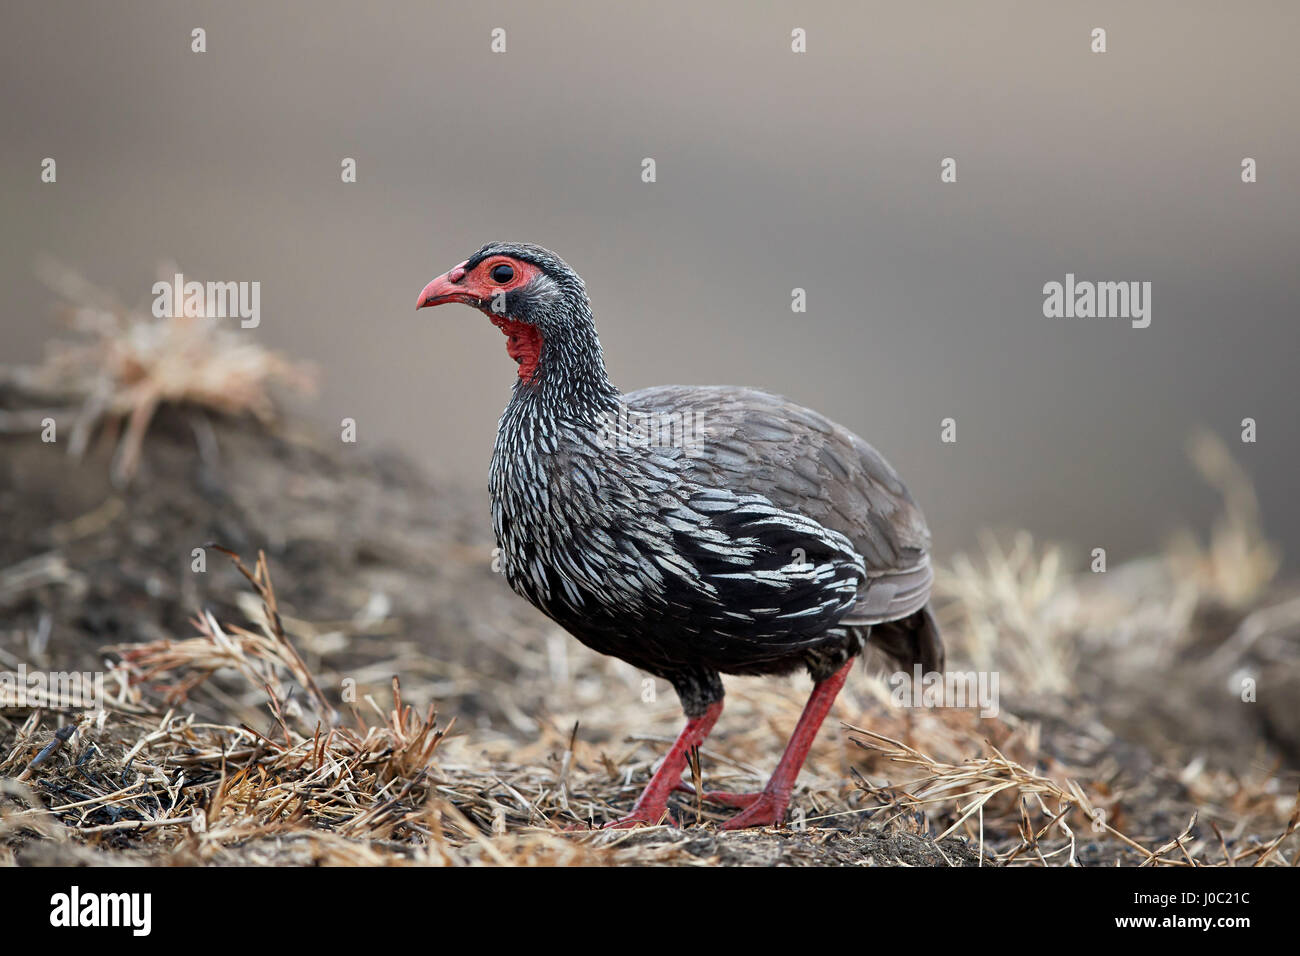 Red-necked spurfowl (red-necked francolin) (Francolinus afer) (Pternistes afer), Mikumi National Park, Tanzania Stock Photo